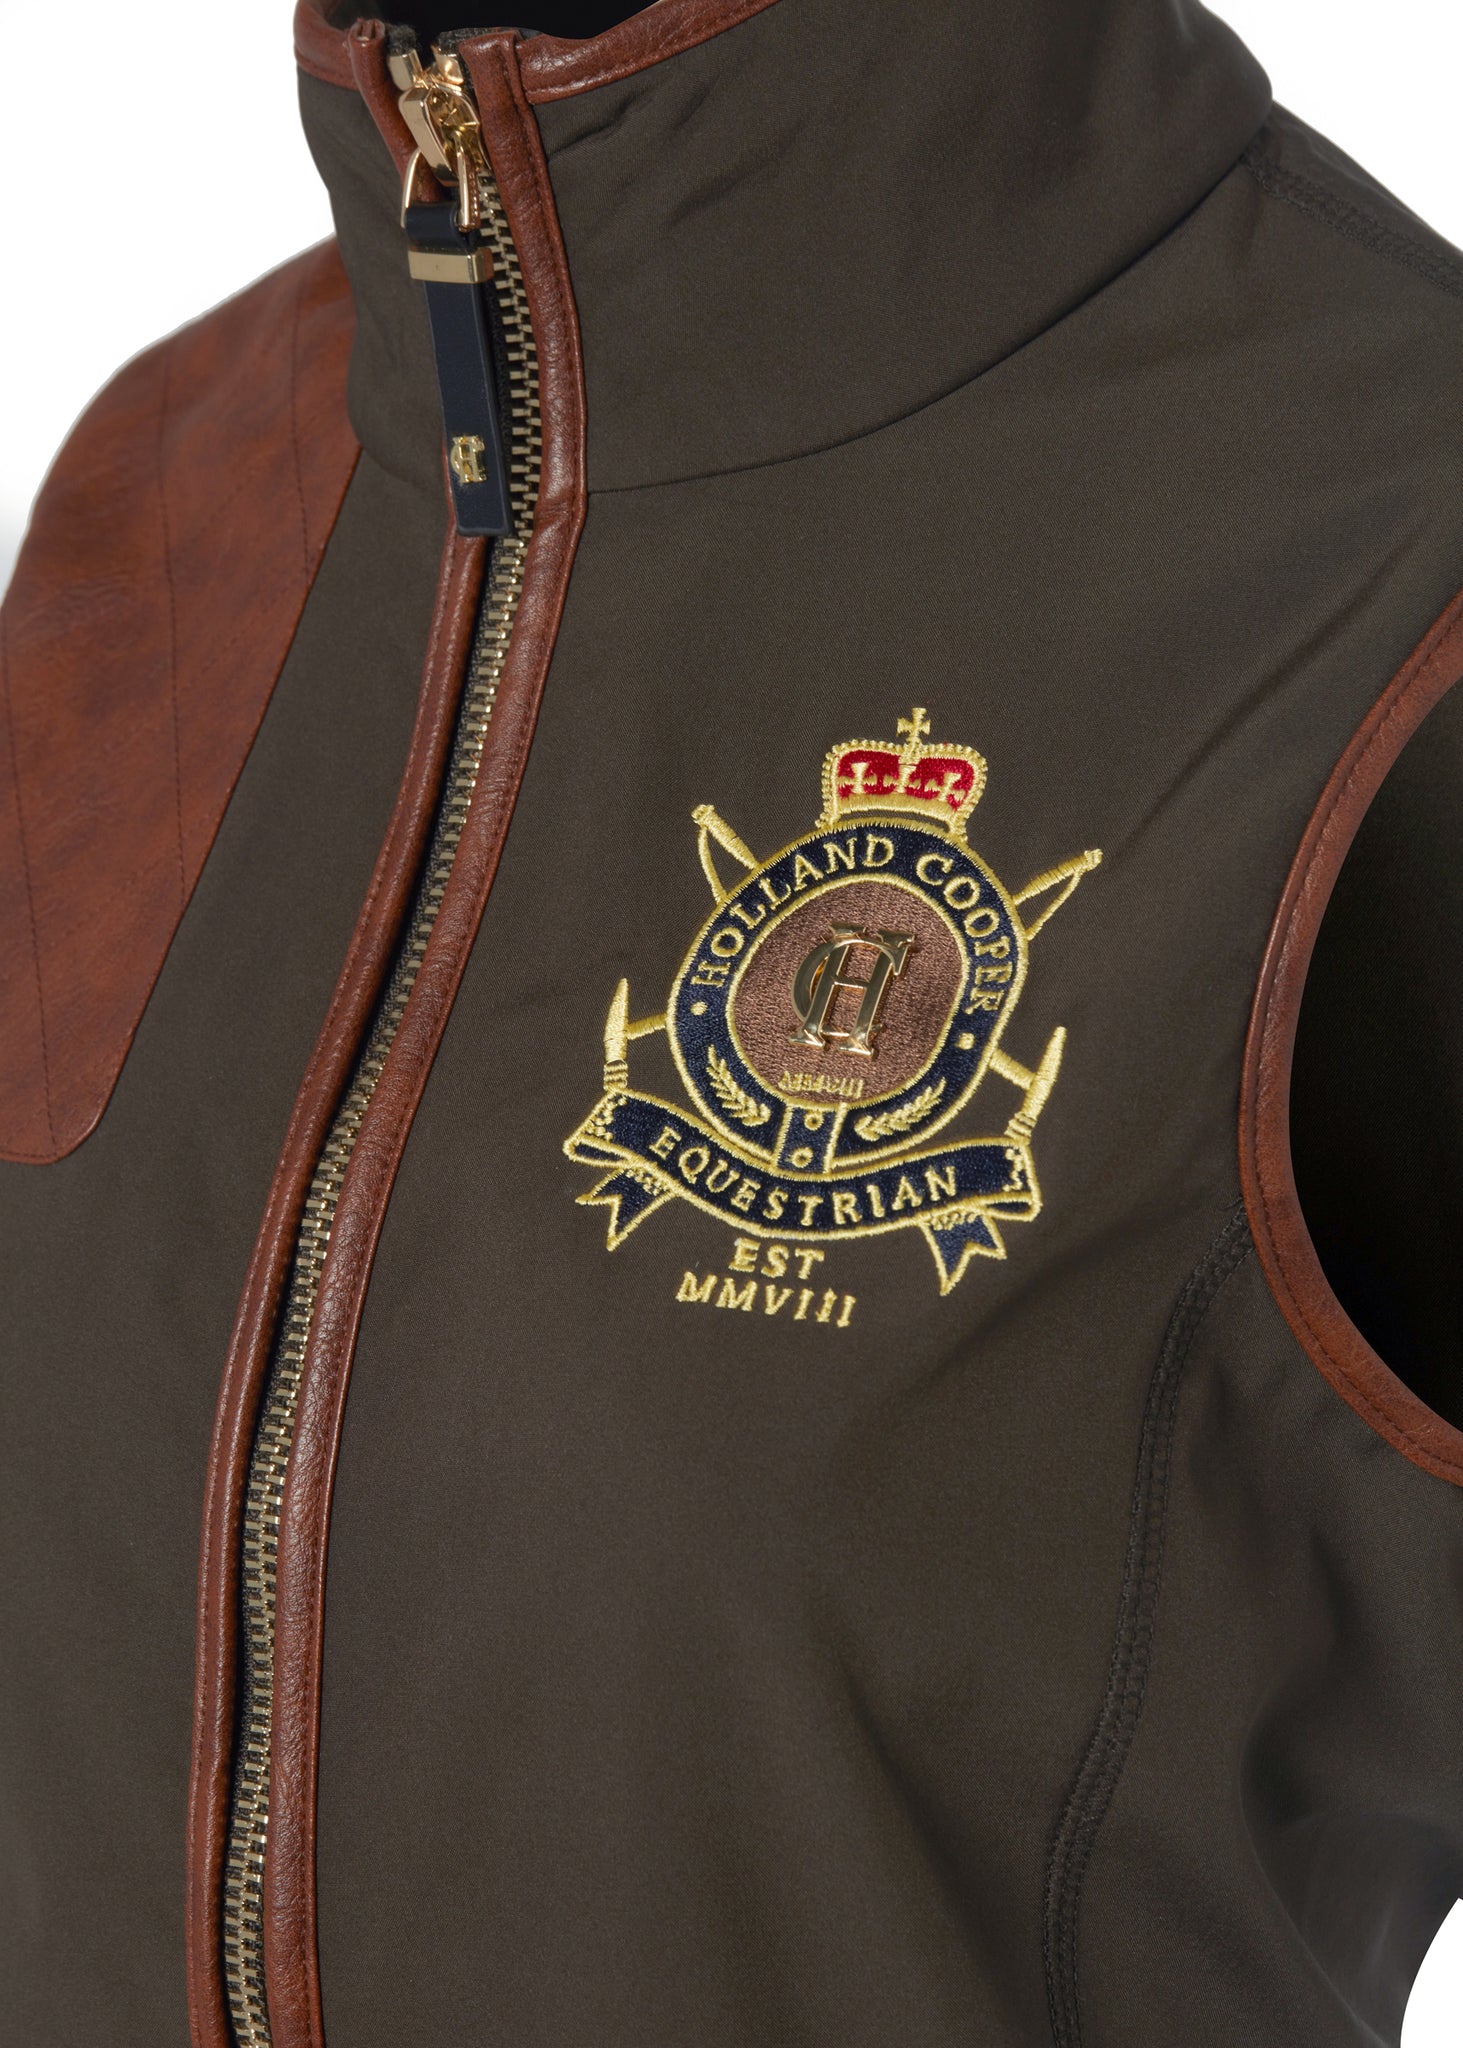 detail shot of the embroidered logo on the womens khaki gilet with dark brown leather seams along the arm holes pockets and down the zip with a gun patch on the shoulder